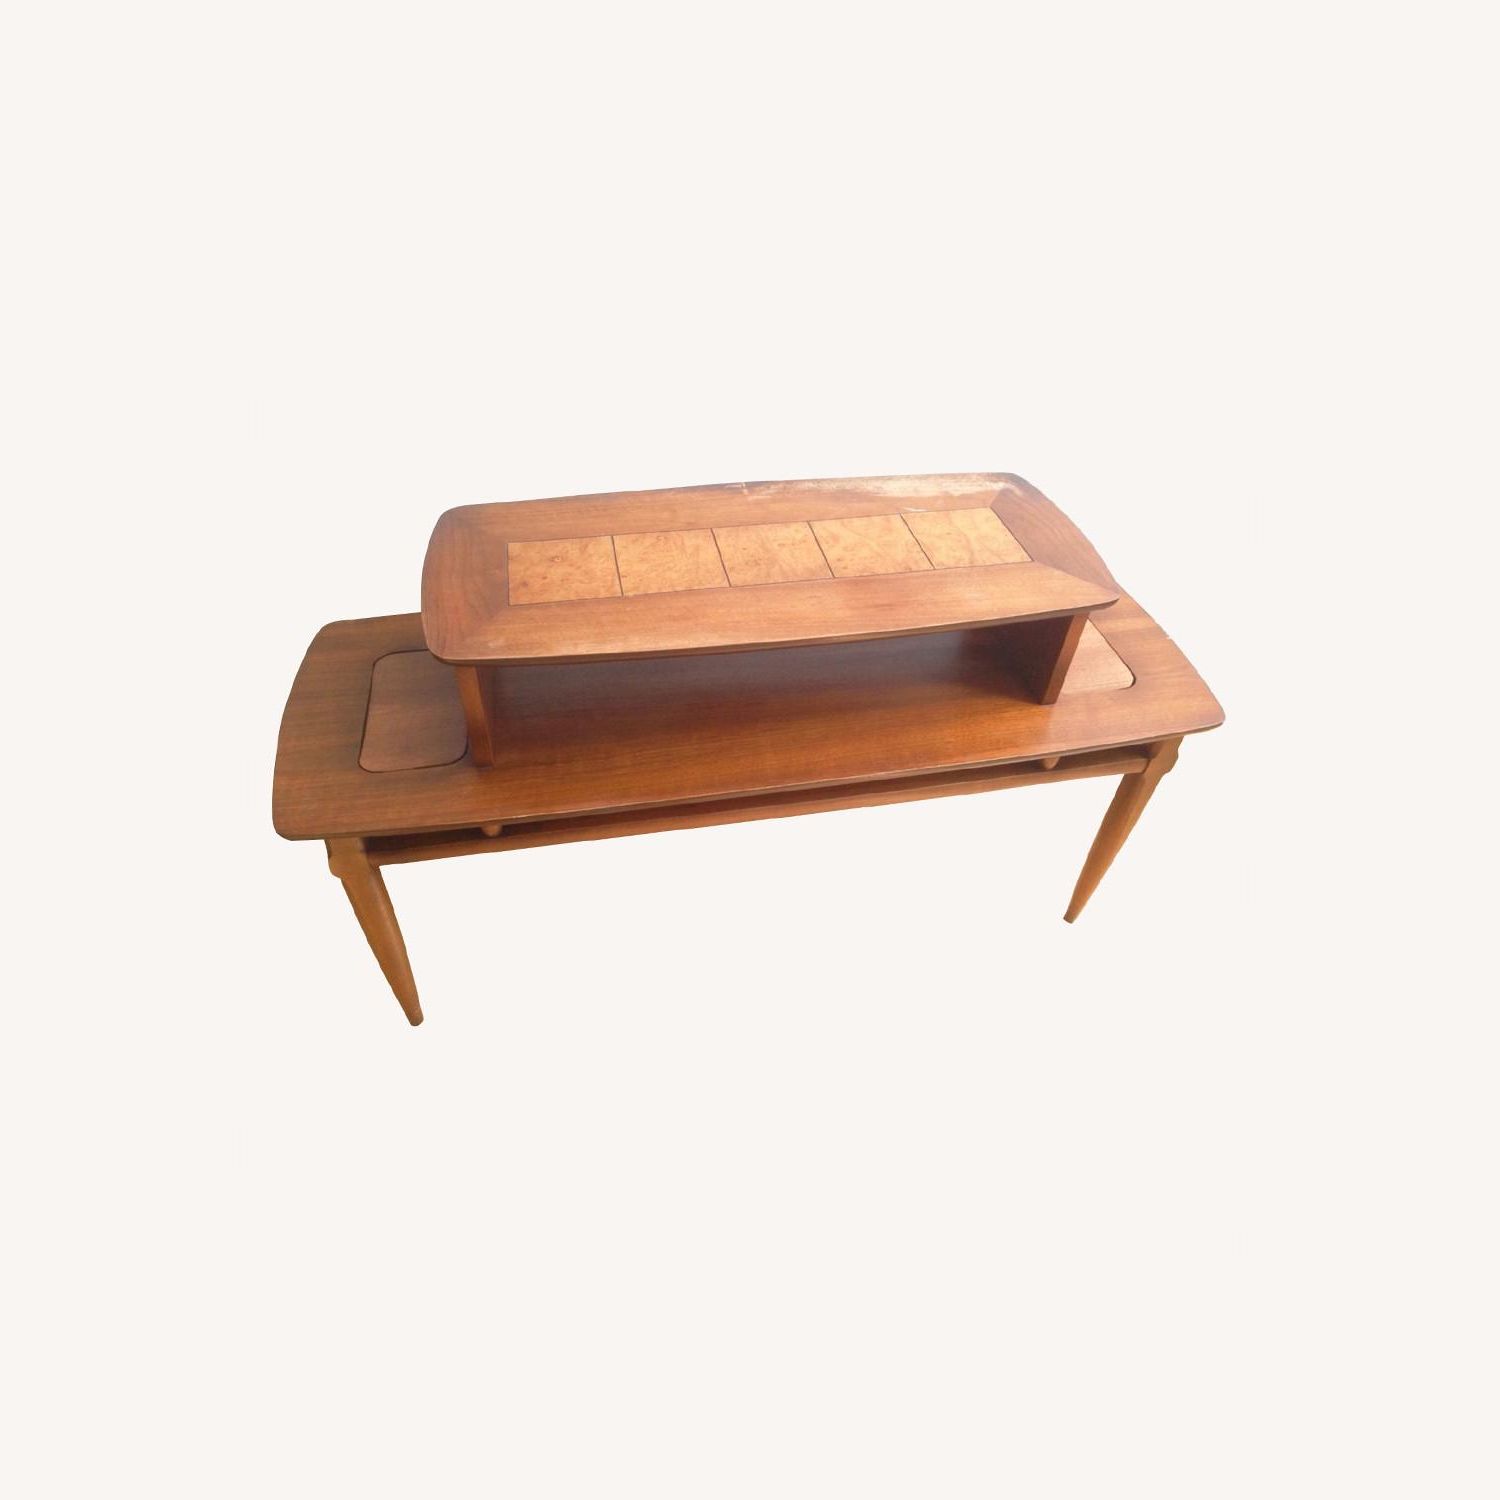 Modern 2 Tier Outdoor Tables Outdoor Tables Inside Fashionable Lane Mid Century Modern 2 Tier Coffee Table – Aptdeco (View 14 of 15)